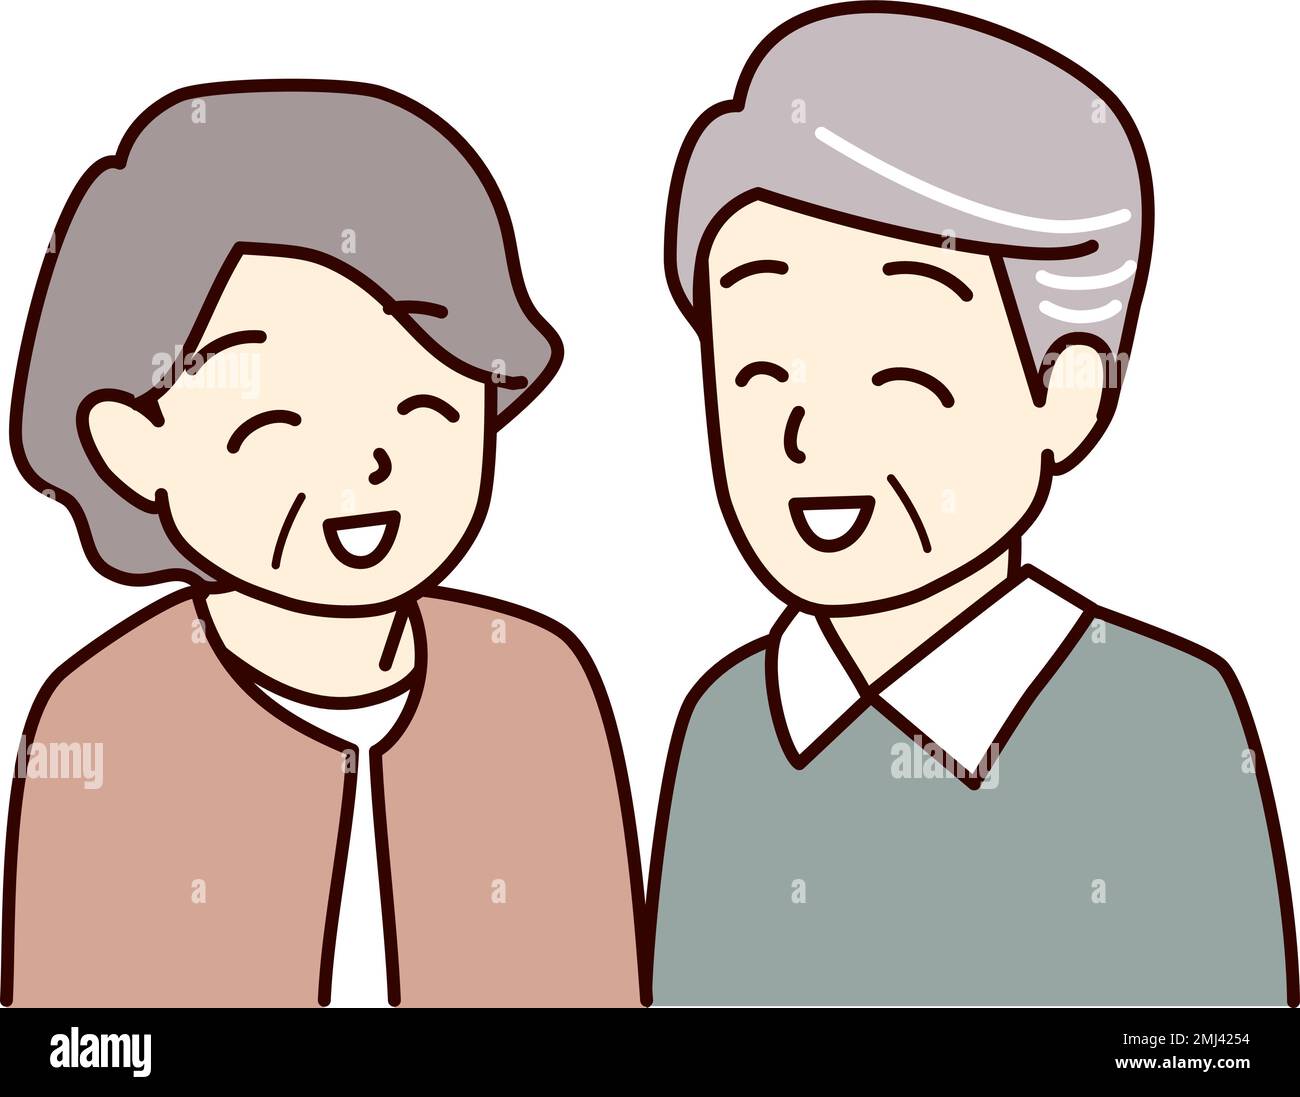 Illustration of the upper body of an elderly couple smiling at each other. Stock Vector